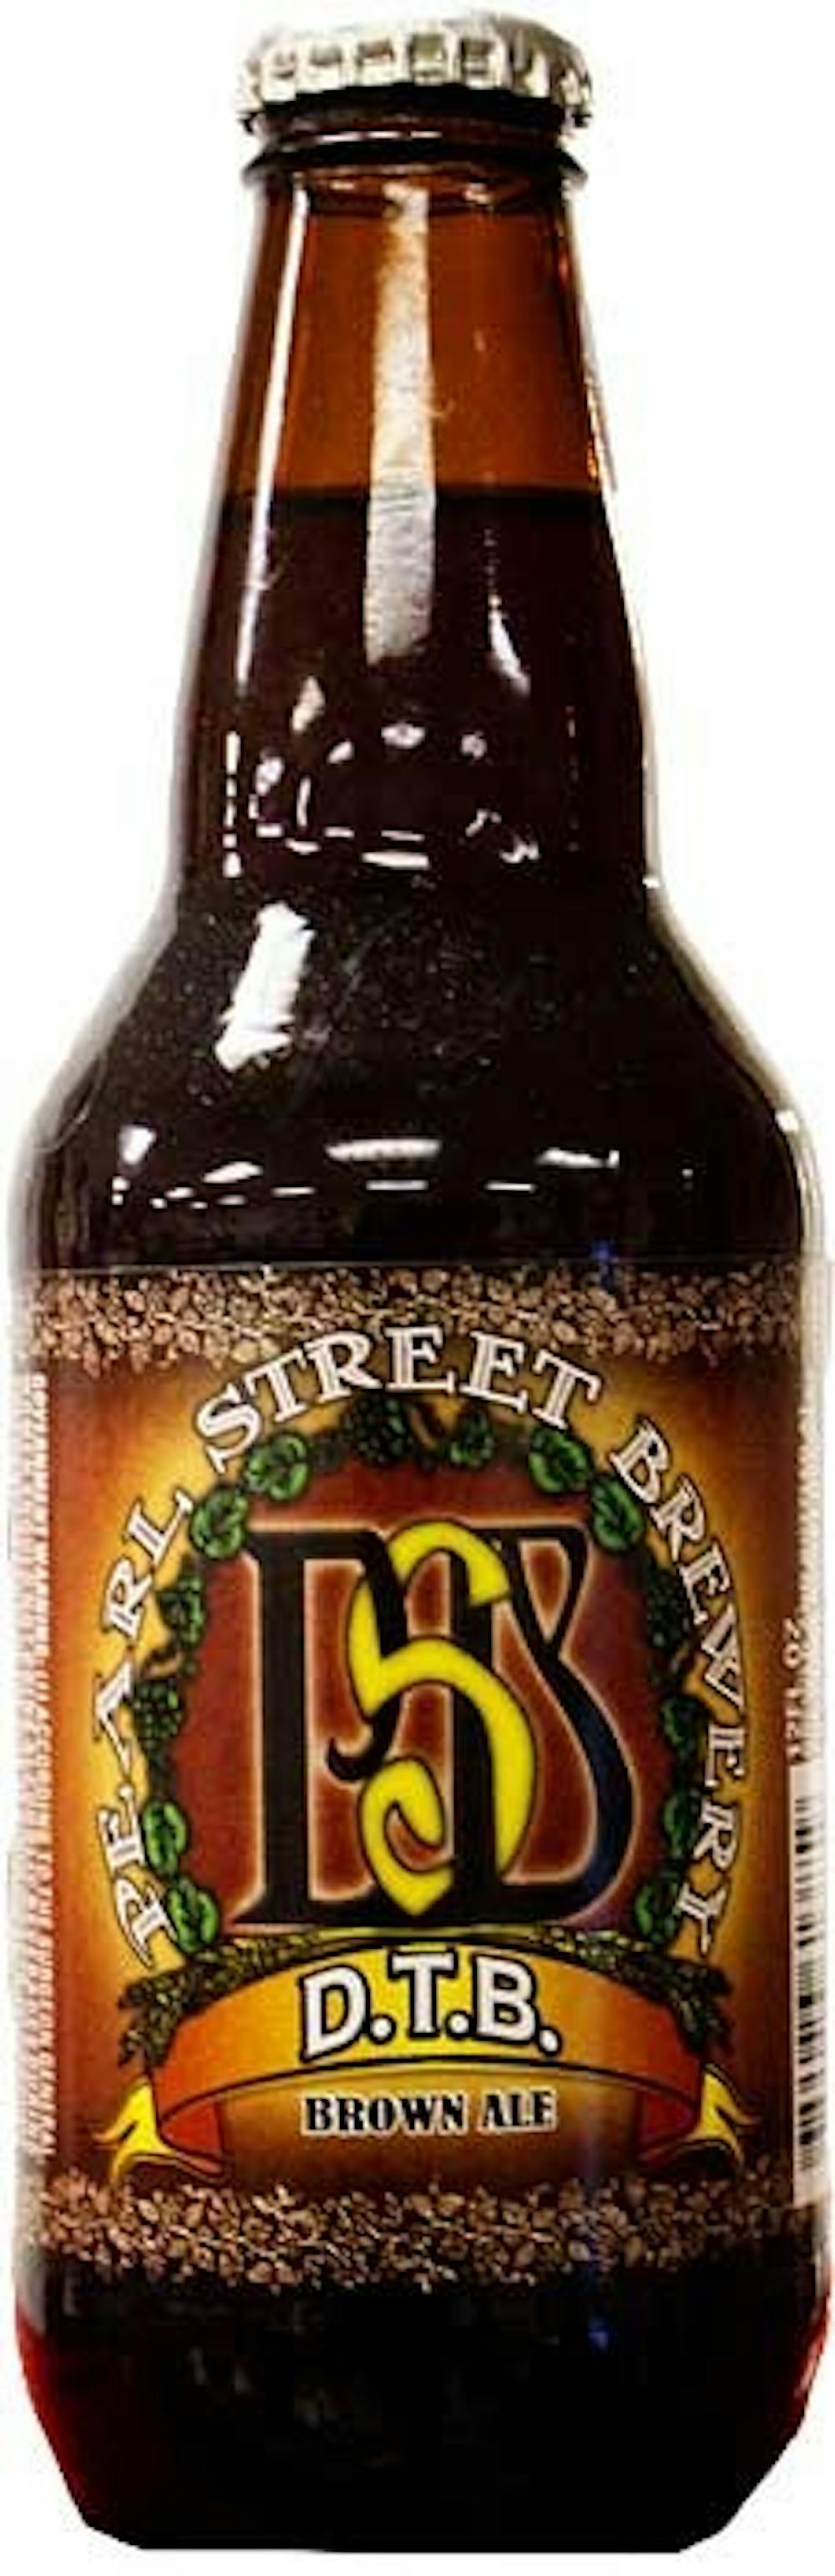 New Beer Thursday--Pearl Street Brewery Brown Ale